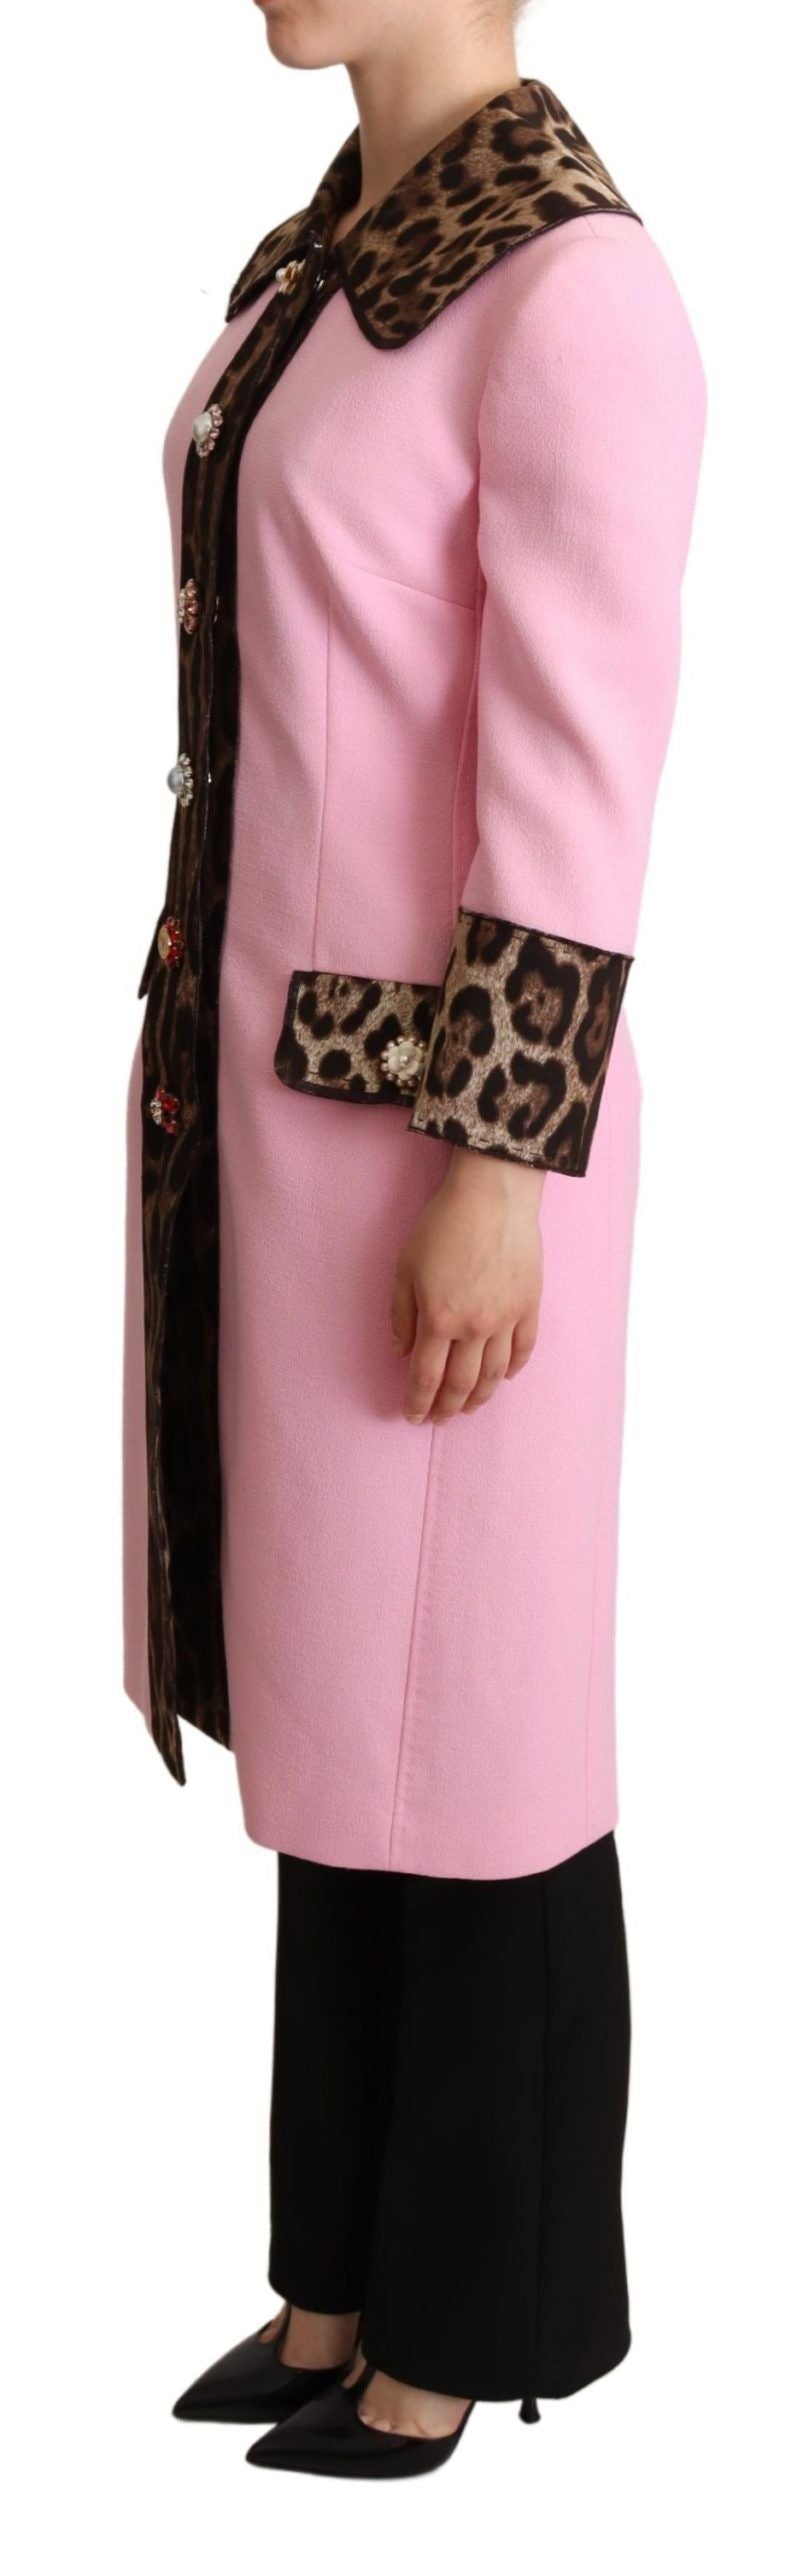 Dolce & Gabbana Pink Leopard Wool Trenchcoat Jacket - Designed by Dolce & Gabbana Available to Buy at a Discounted Price on Moon Behind The Hill Online Designer Discount Store